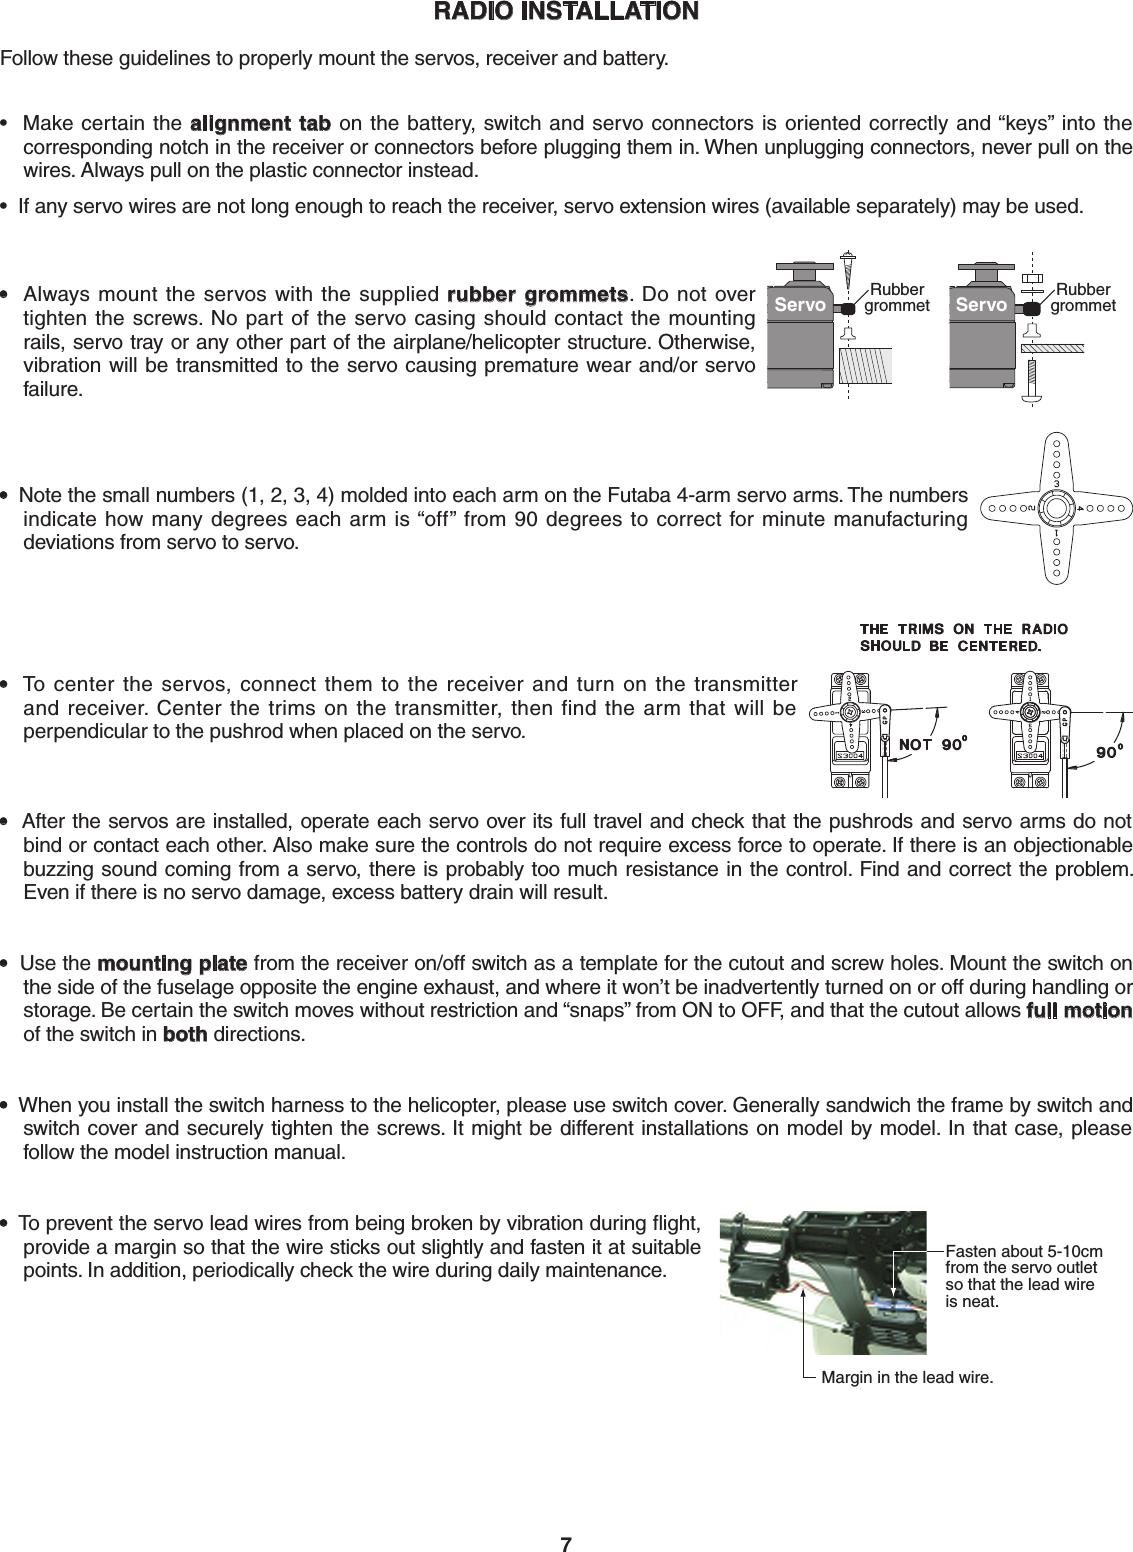 7RADIO INSTALLATIONFollow these guidelines to properly mount the servos, receiver and battery.  •  Make certain the alignment tab on the battery, switch and servo connectors is oriented correctly and “keys” into the corresponding notch in the receiver or connectors before plugging them in. When unplugging connectors, never pull on the wires. Always pull on the plastic connector instead. •  If any servo wires are not long enough to reach the receiver, servo extension wires (available separately) may be used. Servo Rubbergrommet Servo Rubbergrommet•  Always mount the servos with the supplied rubber grommets.  Do not  over tighten the screws. No part of the servo casing should contact the mounting rails, servo tray or any other part of the airplane/helicopter structure. Otherwise, vibration will be transmitted to the servo causing premature wear and/or servo failure. •  Note the small numbers (1, 2, 3, 4) molded into each arm on the Futaba 4-arm servo arms. The numbers indicate how many degrees each arm is “off” from 90 degrees to correct for minute manufacturing deviations from servo to servo. •  To center the servos, connect them to the receiver and turn on the transmitter and receiver. Center the trims on the transmitter, then find the arm that will be perpendicular to the pushrod when placed on the servo. •  After the servos are installed, operate each servo over its full travel and check that the pushrods and servo arms do not bind or contact each other. Also make sure the controls do not require excess force to operate. If there is an objectionable buzzing sound coming from a servo, there is probably too much resistance in the control. Find and correct the problem. Even if there is no servo damage, excess battery drain will result. •  Use the mounting plate from the receiver on/off switch as a template for the cutout and screw holes. Mount the switch on the side of the fuselage opposite the engine exhaust, and where it won’t be inadvertently turned on or off during handling or storage. Be certain the switch moves without restriction and “snaps” from ON to OFF, and that the cutout allows full motion of the switch in both directions. •  When you install the switch harness to the helicopter, please use switch cover. Generally sandwich the frame by switch and switch cover and securely tighten the screws. It might be different installations on model by model. In that case, please follow the model instruction manual.Fasten about 5-10cm from the servo outlet so that the lead wire is neat.Margin in the lead wire.•  To prevent the servo lead wires from being broken by vibration during ﬂight, provide a margin so that the wire sticks out slightly and fasten it at suitable points. In addition, periodically check the wire during daily maintenance.